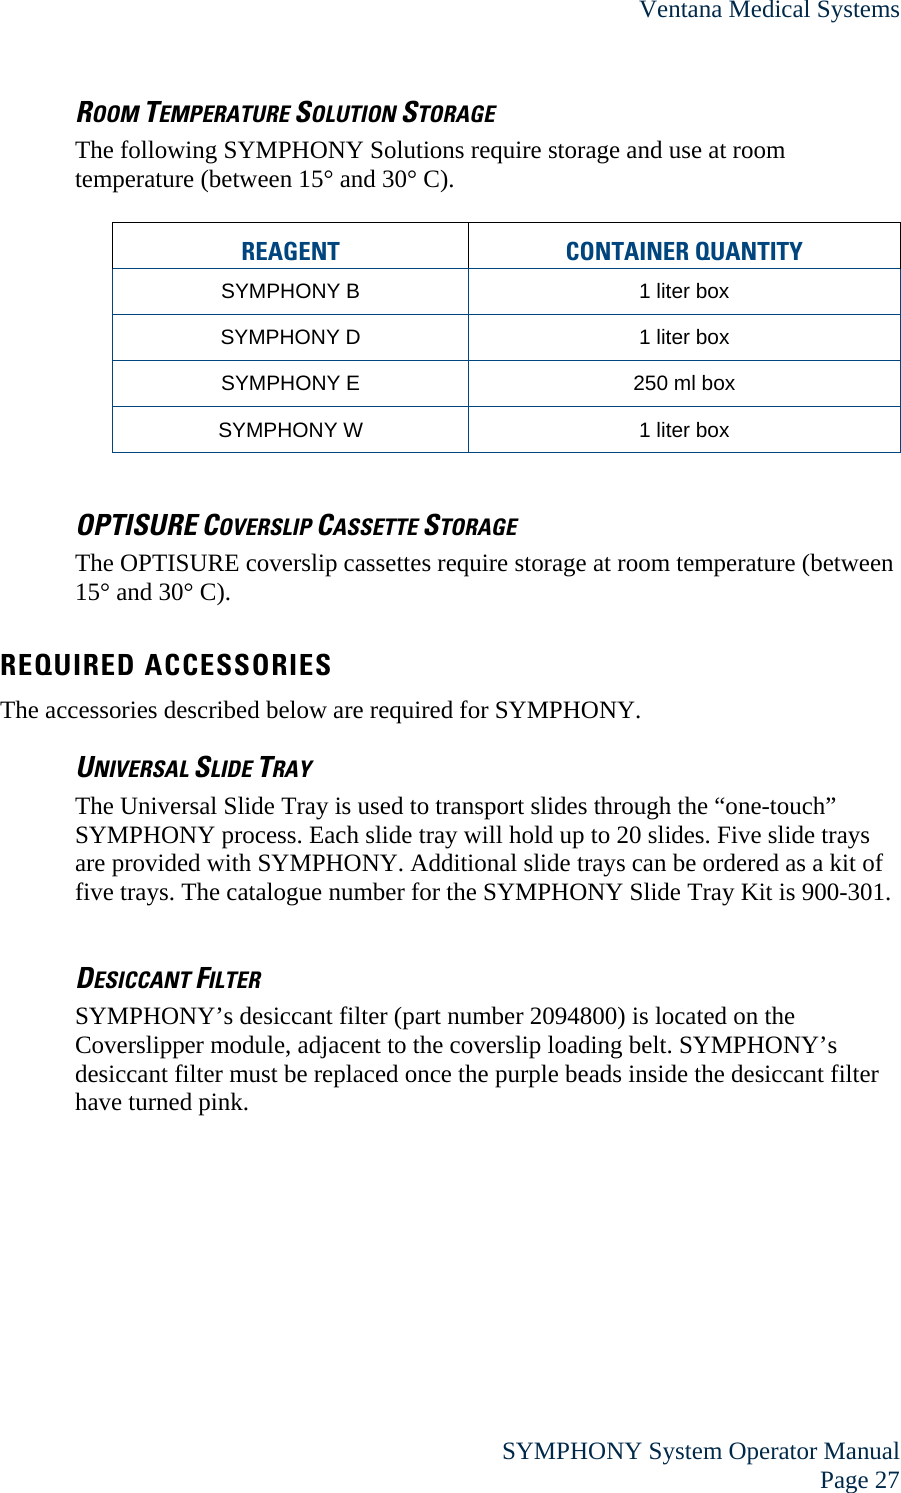 Ventana Medical Systems  SYMPHONY System Operator Manual Page 27 ROOM TEMPERATURE SOLUTION STORAGE The following SYMPHONY Solutions require storage and use at room temperature (between 15° and 30° C).  REAGENT CONTAINER QUANTITY  SYMPHONY B  1 liter box SYMPHONY D  1 liter box SYMPHONY E  250 ml box SYMPHONY W  1 liter box  OPTISURE COVERSLIP CASSETTE STORAGE The OPTISURE coverslip cassettes require storage at room temperature (between 15° and 30° C).   REQUIRED ACCESSORIES The accessories described below are required for SYMPHONY. UNIVERSAL SLIDE TRAY The Universal Slide Tray is used to transport slides through the “one-touch” SYMPHONY process. Each slide tray will hold up to 20 slides. Five slide trays are provided with SYMPHONY. Additional slide trays can be ordered as a kit of five trays. The catalogue number for the SYMPHONY Slide Tray Kit is 900-301.  DESICCANT FILTER SYMPHONY’s desiccant filter (part number 2094800) is located on the Coverslipper module, adjacent to the coverslip loading belt. SYMPHONY’s desiccant filter must be replaced once the purple beads inside the desiccant filter have turned pink.   